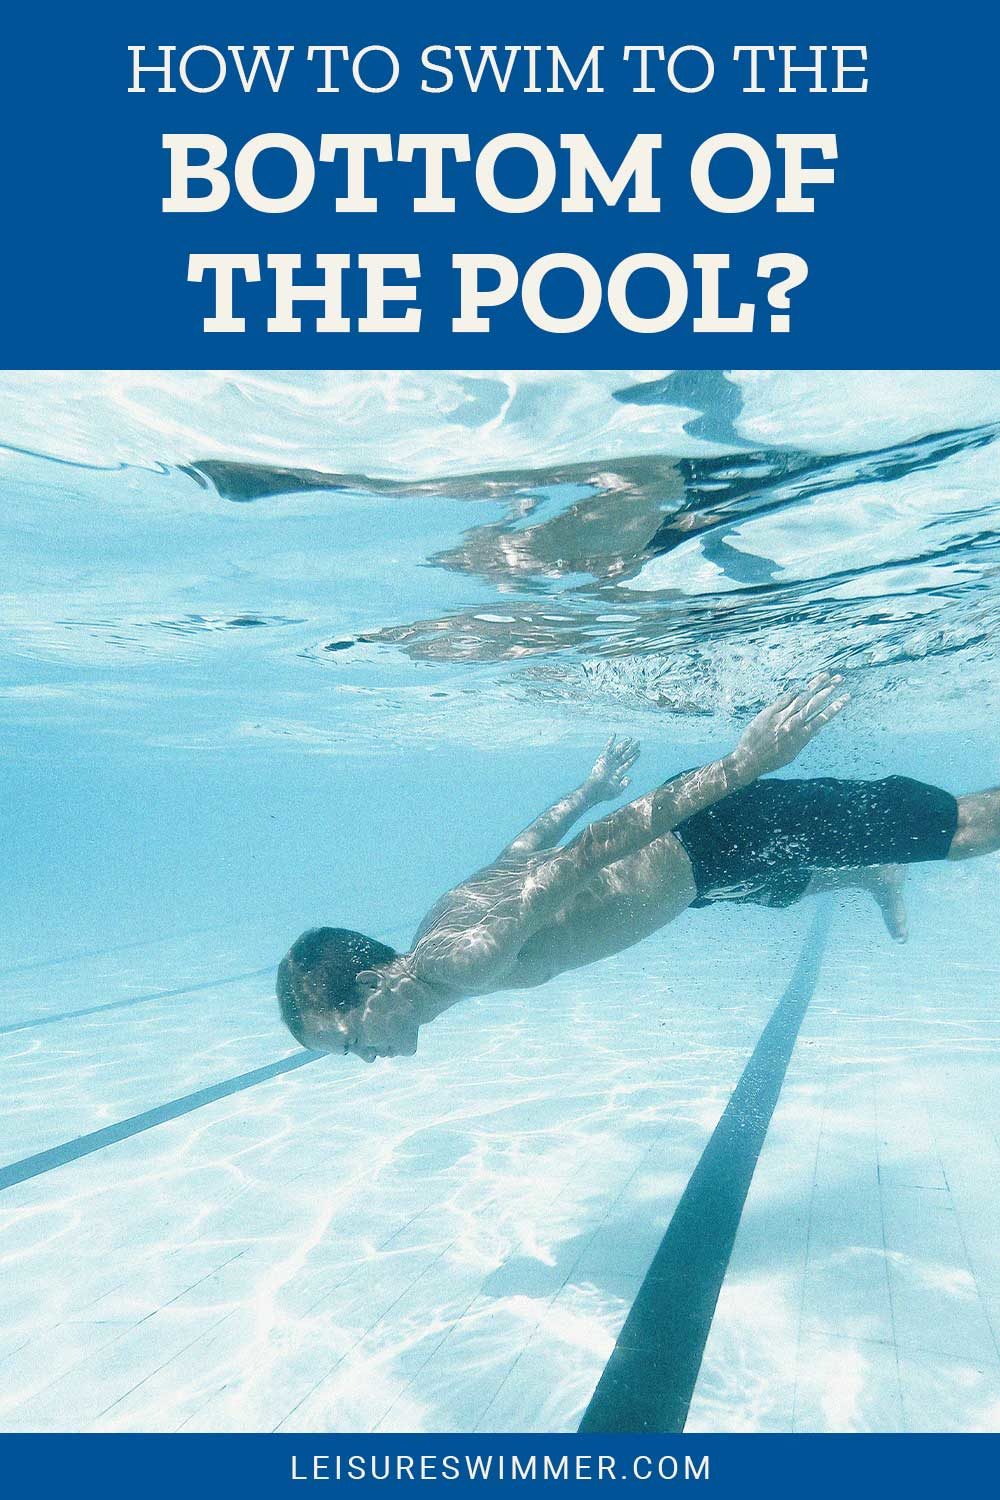 Man swimming under water in a pool - How To Swim To The Bottom Of The Pool?